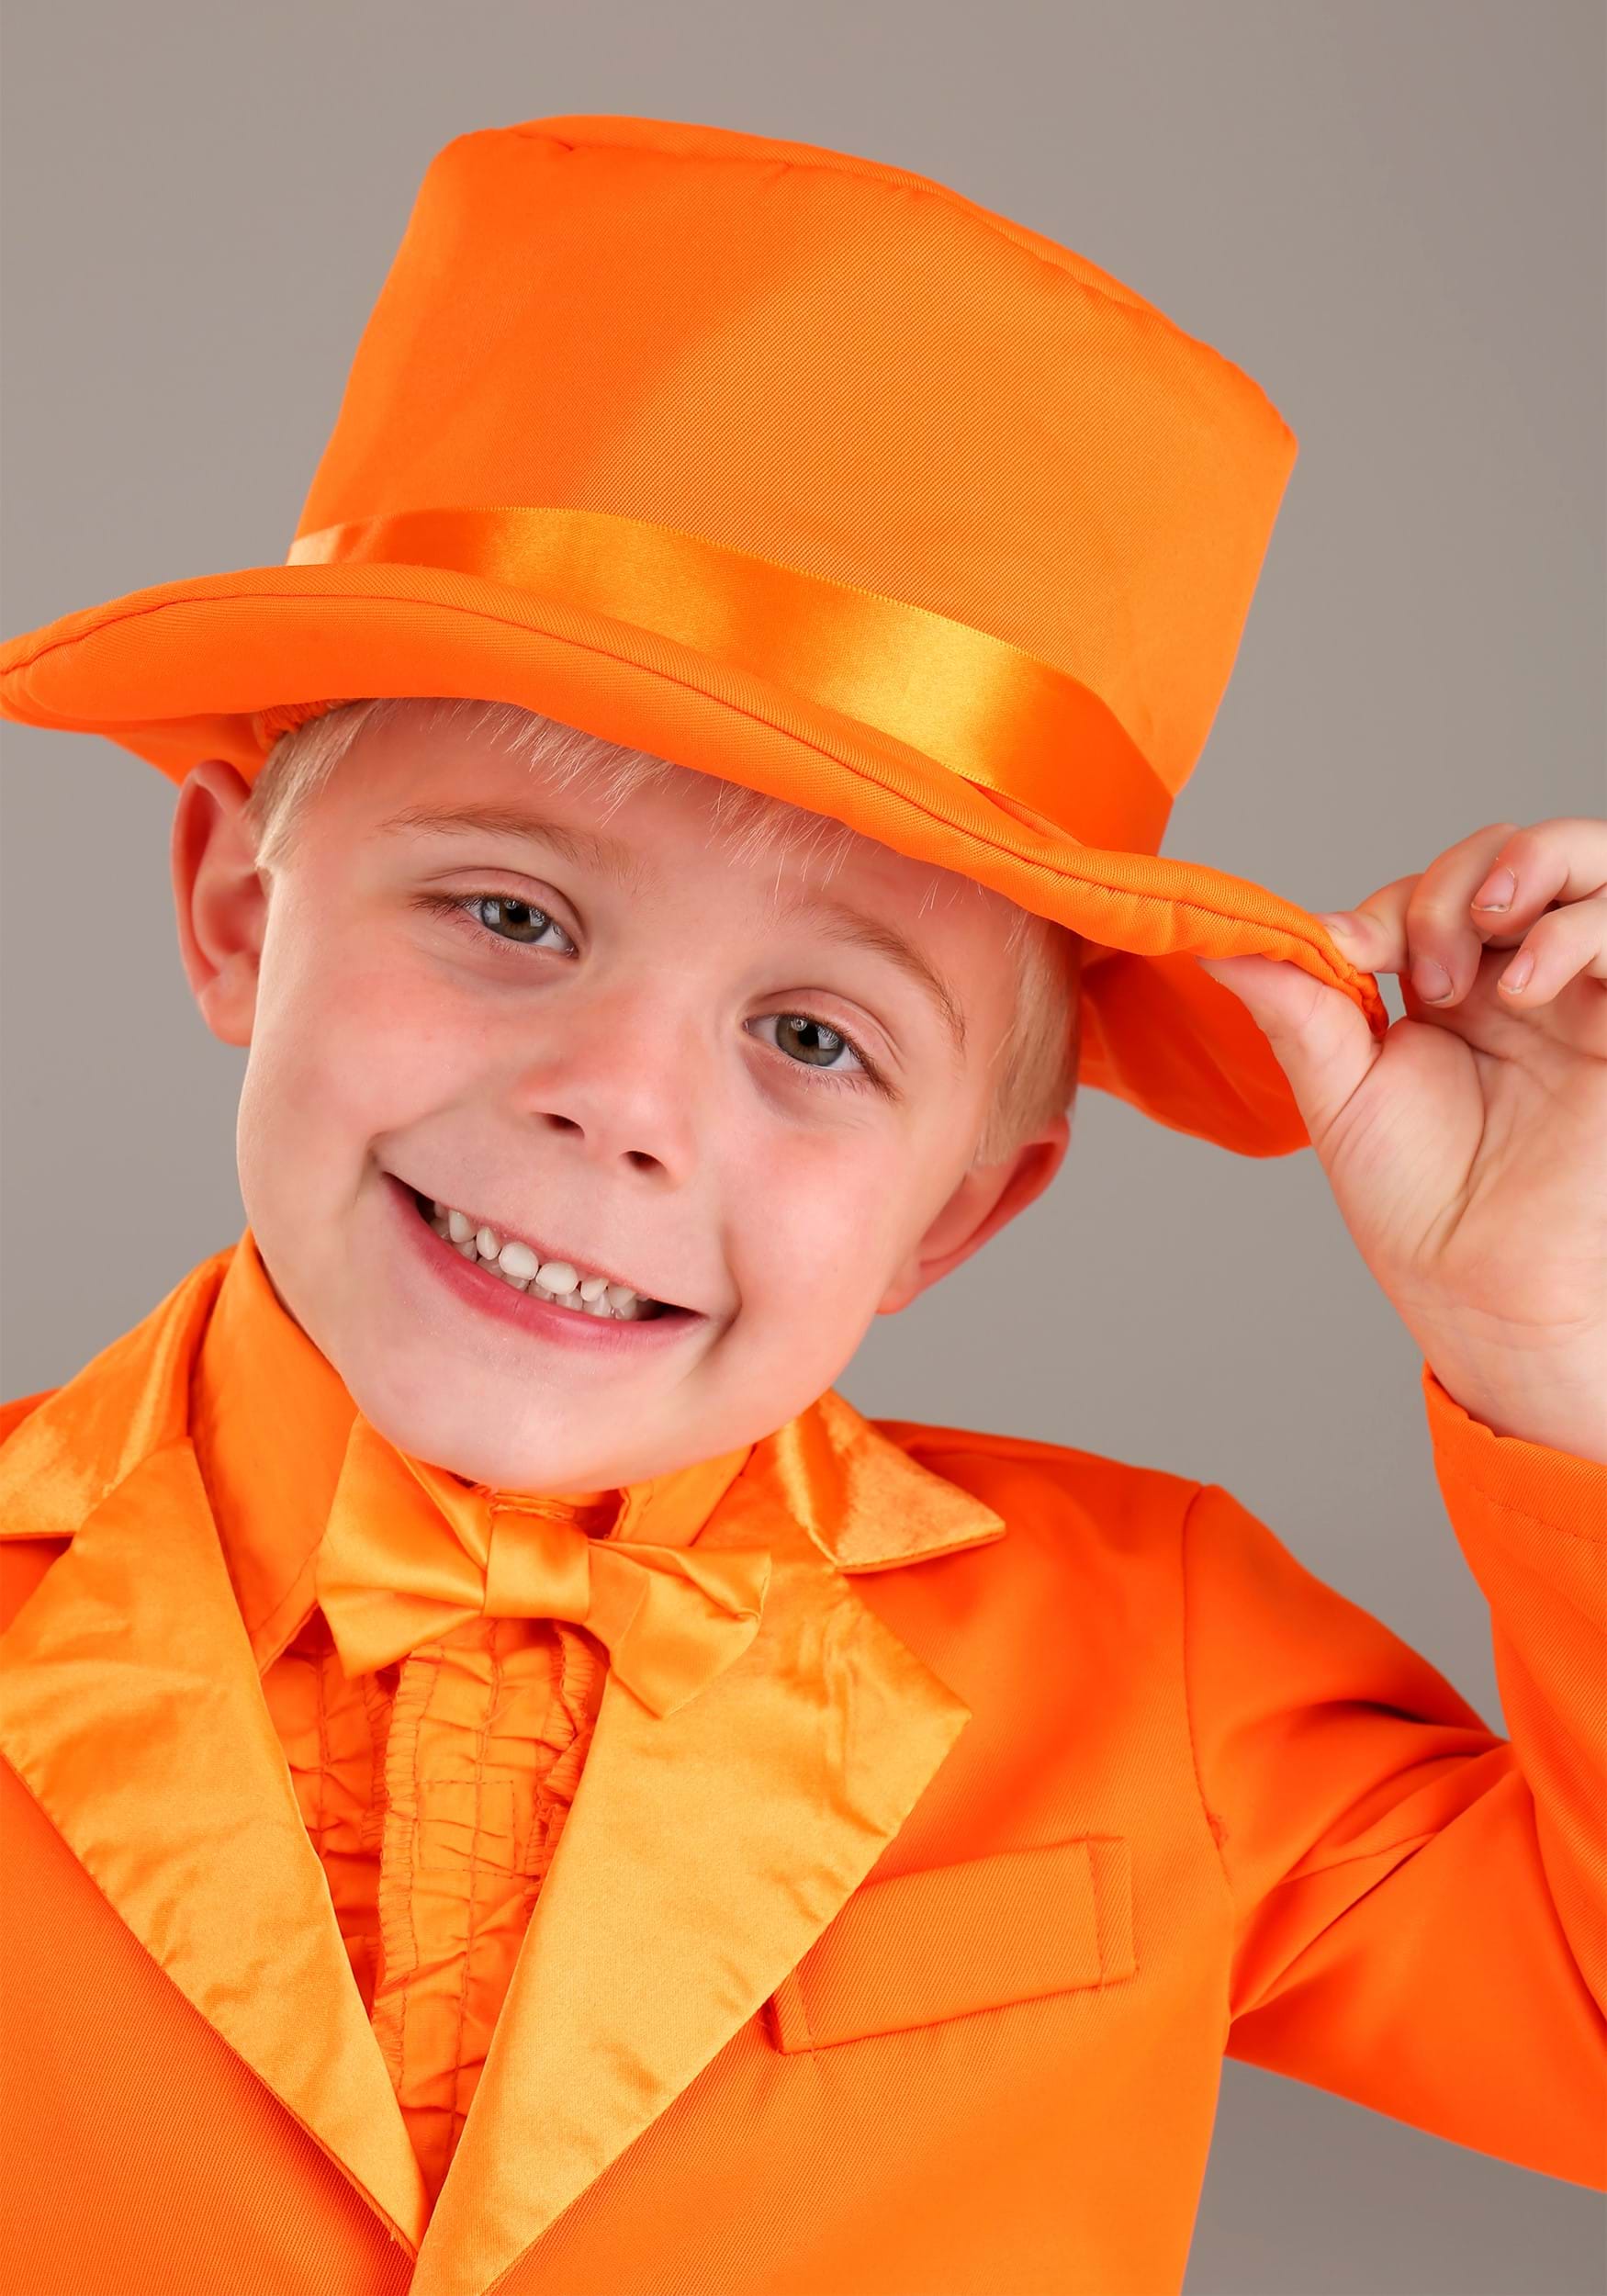 Orange Tuxedo Costume for Toddlers | Exclusive | Made By Us